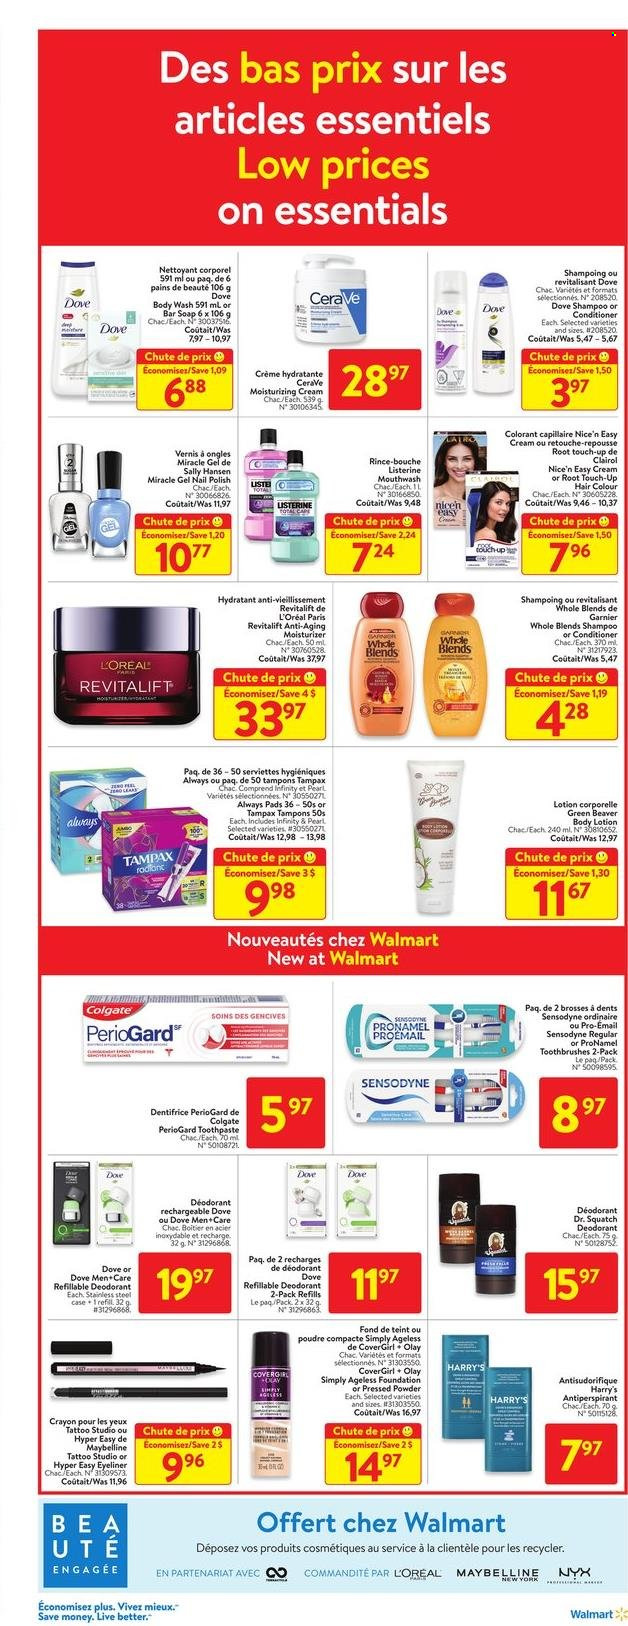 thumbnail - Walmart Flyer - February 09, 2023 - February 15, 2023 - Sales products - Dove, body wash, soap bar, soap, toothpaste, mouthwash, Always pads, tampons, CeraVe, L’Oréal, moisturizer, Olay, NYX Cosmetics, Infinity, Root Touch-Up, Clairol, conditioner, hair color, body lotion, anti-perspirant, polish, Maybelline, eyeliner, face powder, Colgate, Garnier, Listerine, Sally Hansen, shampoo, Tampax, Sensodyne, deodorant. Page 7.